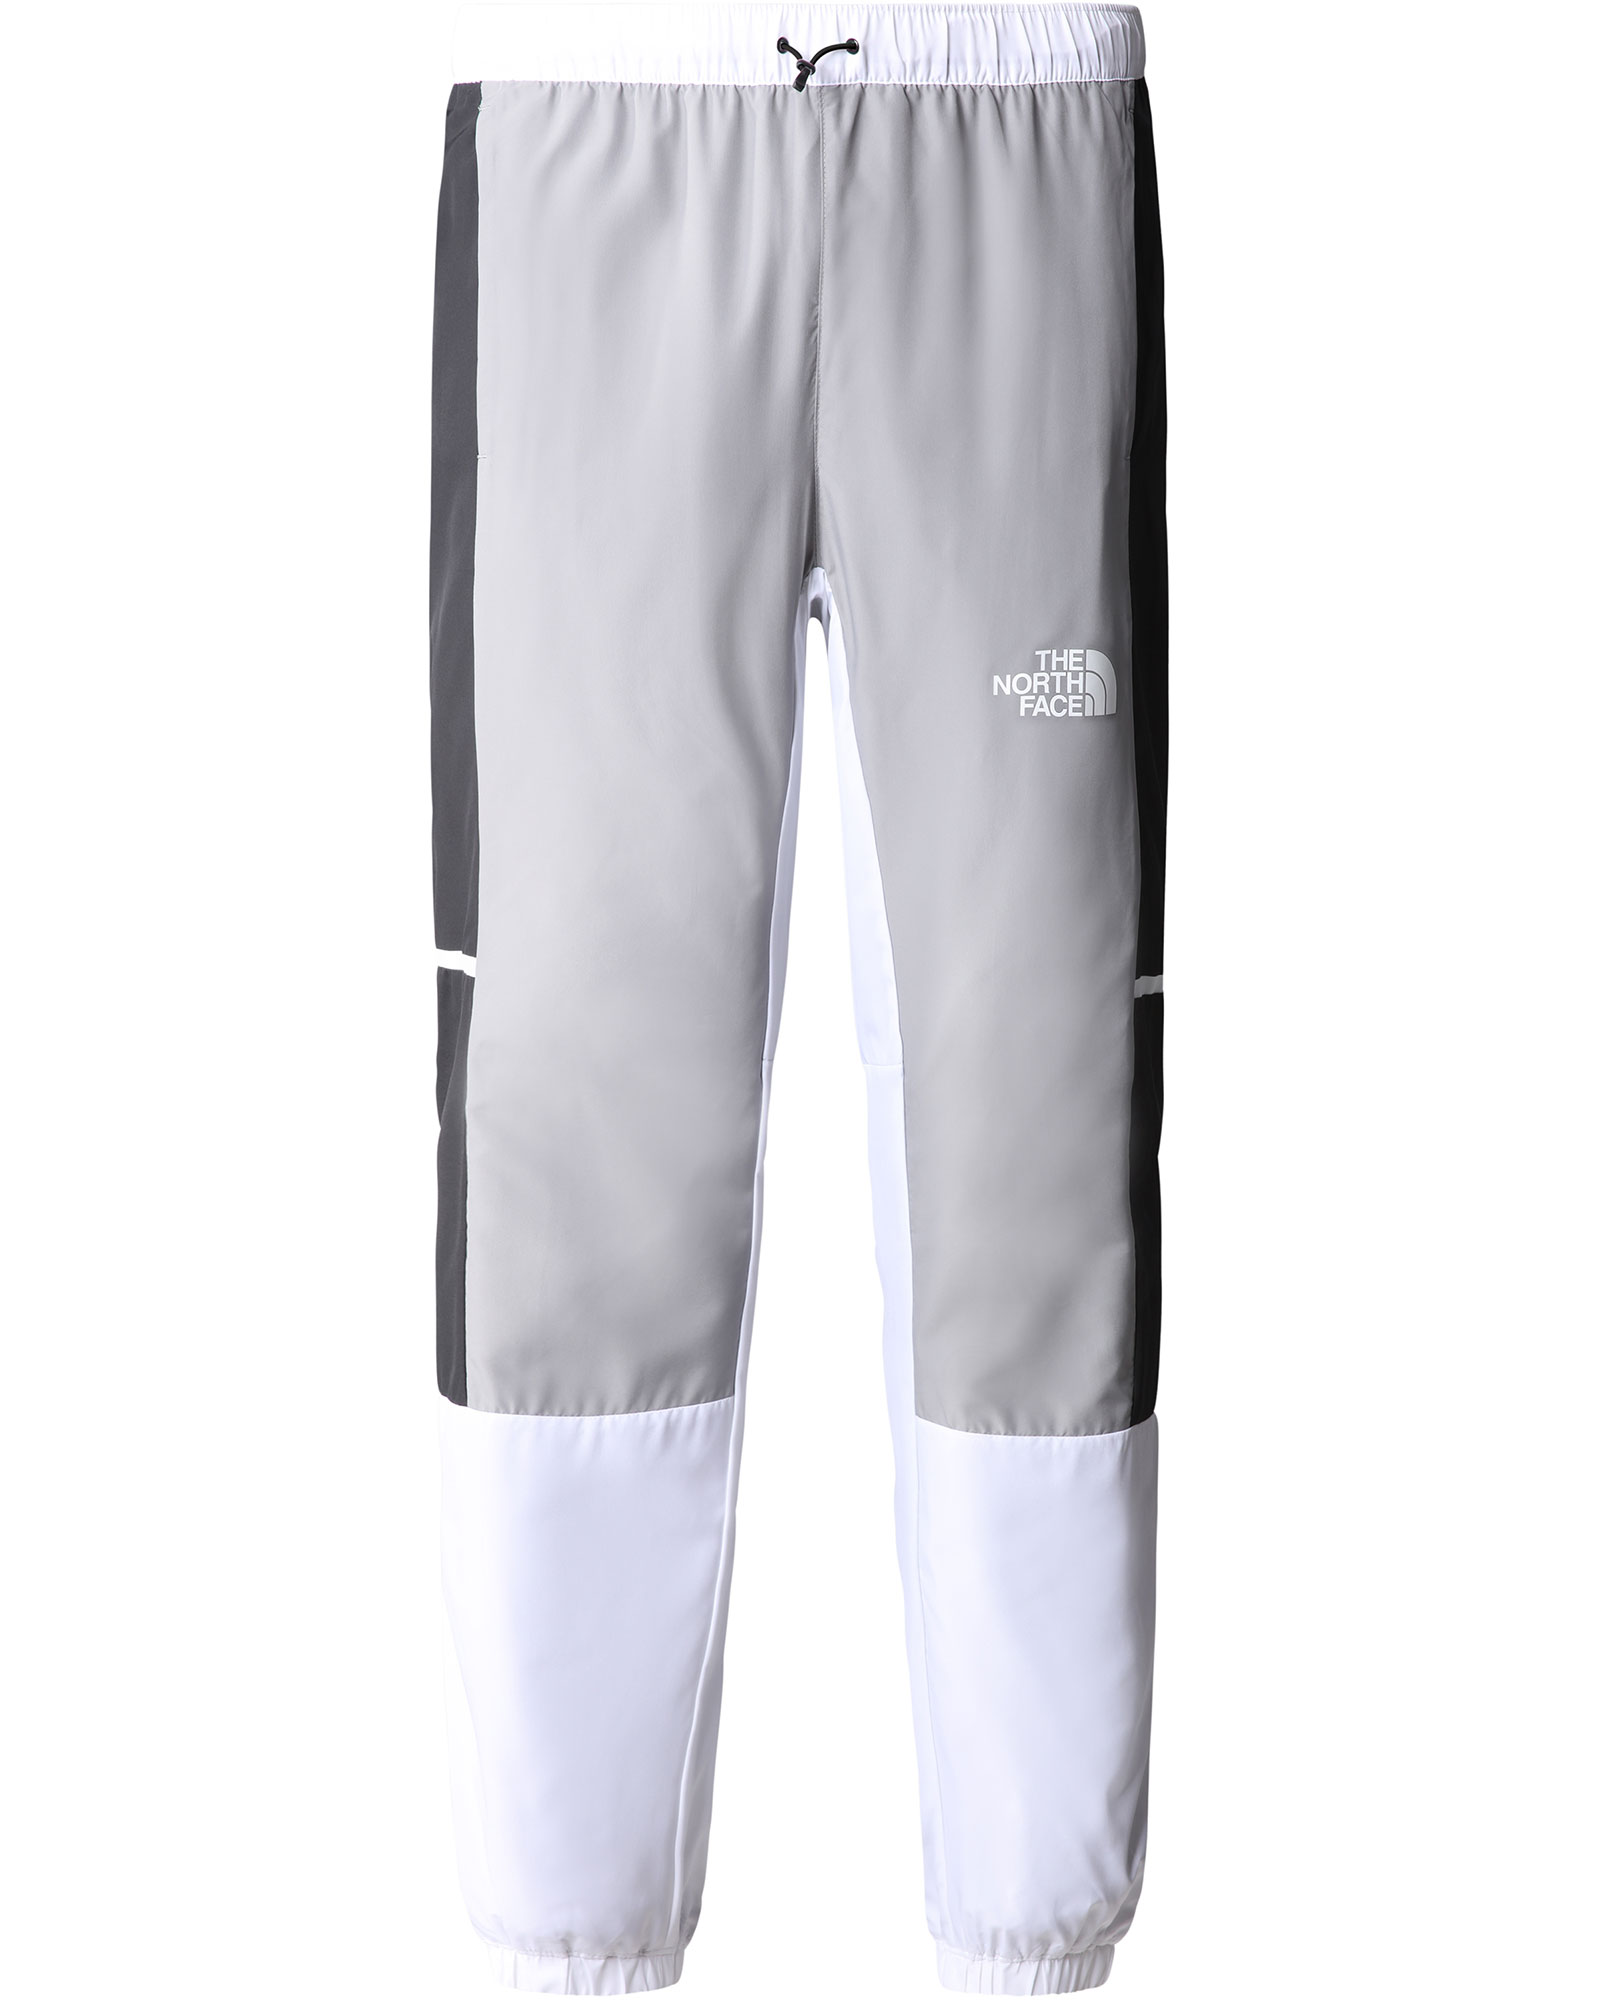 The North Face Mens Ma Wind Pants